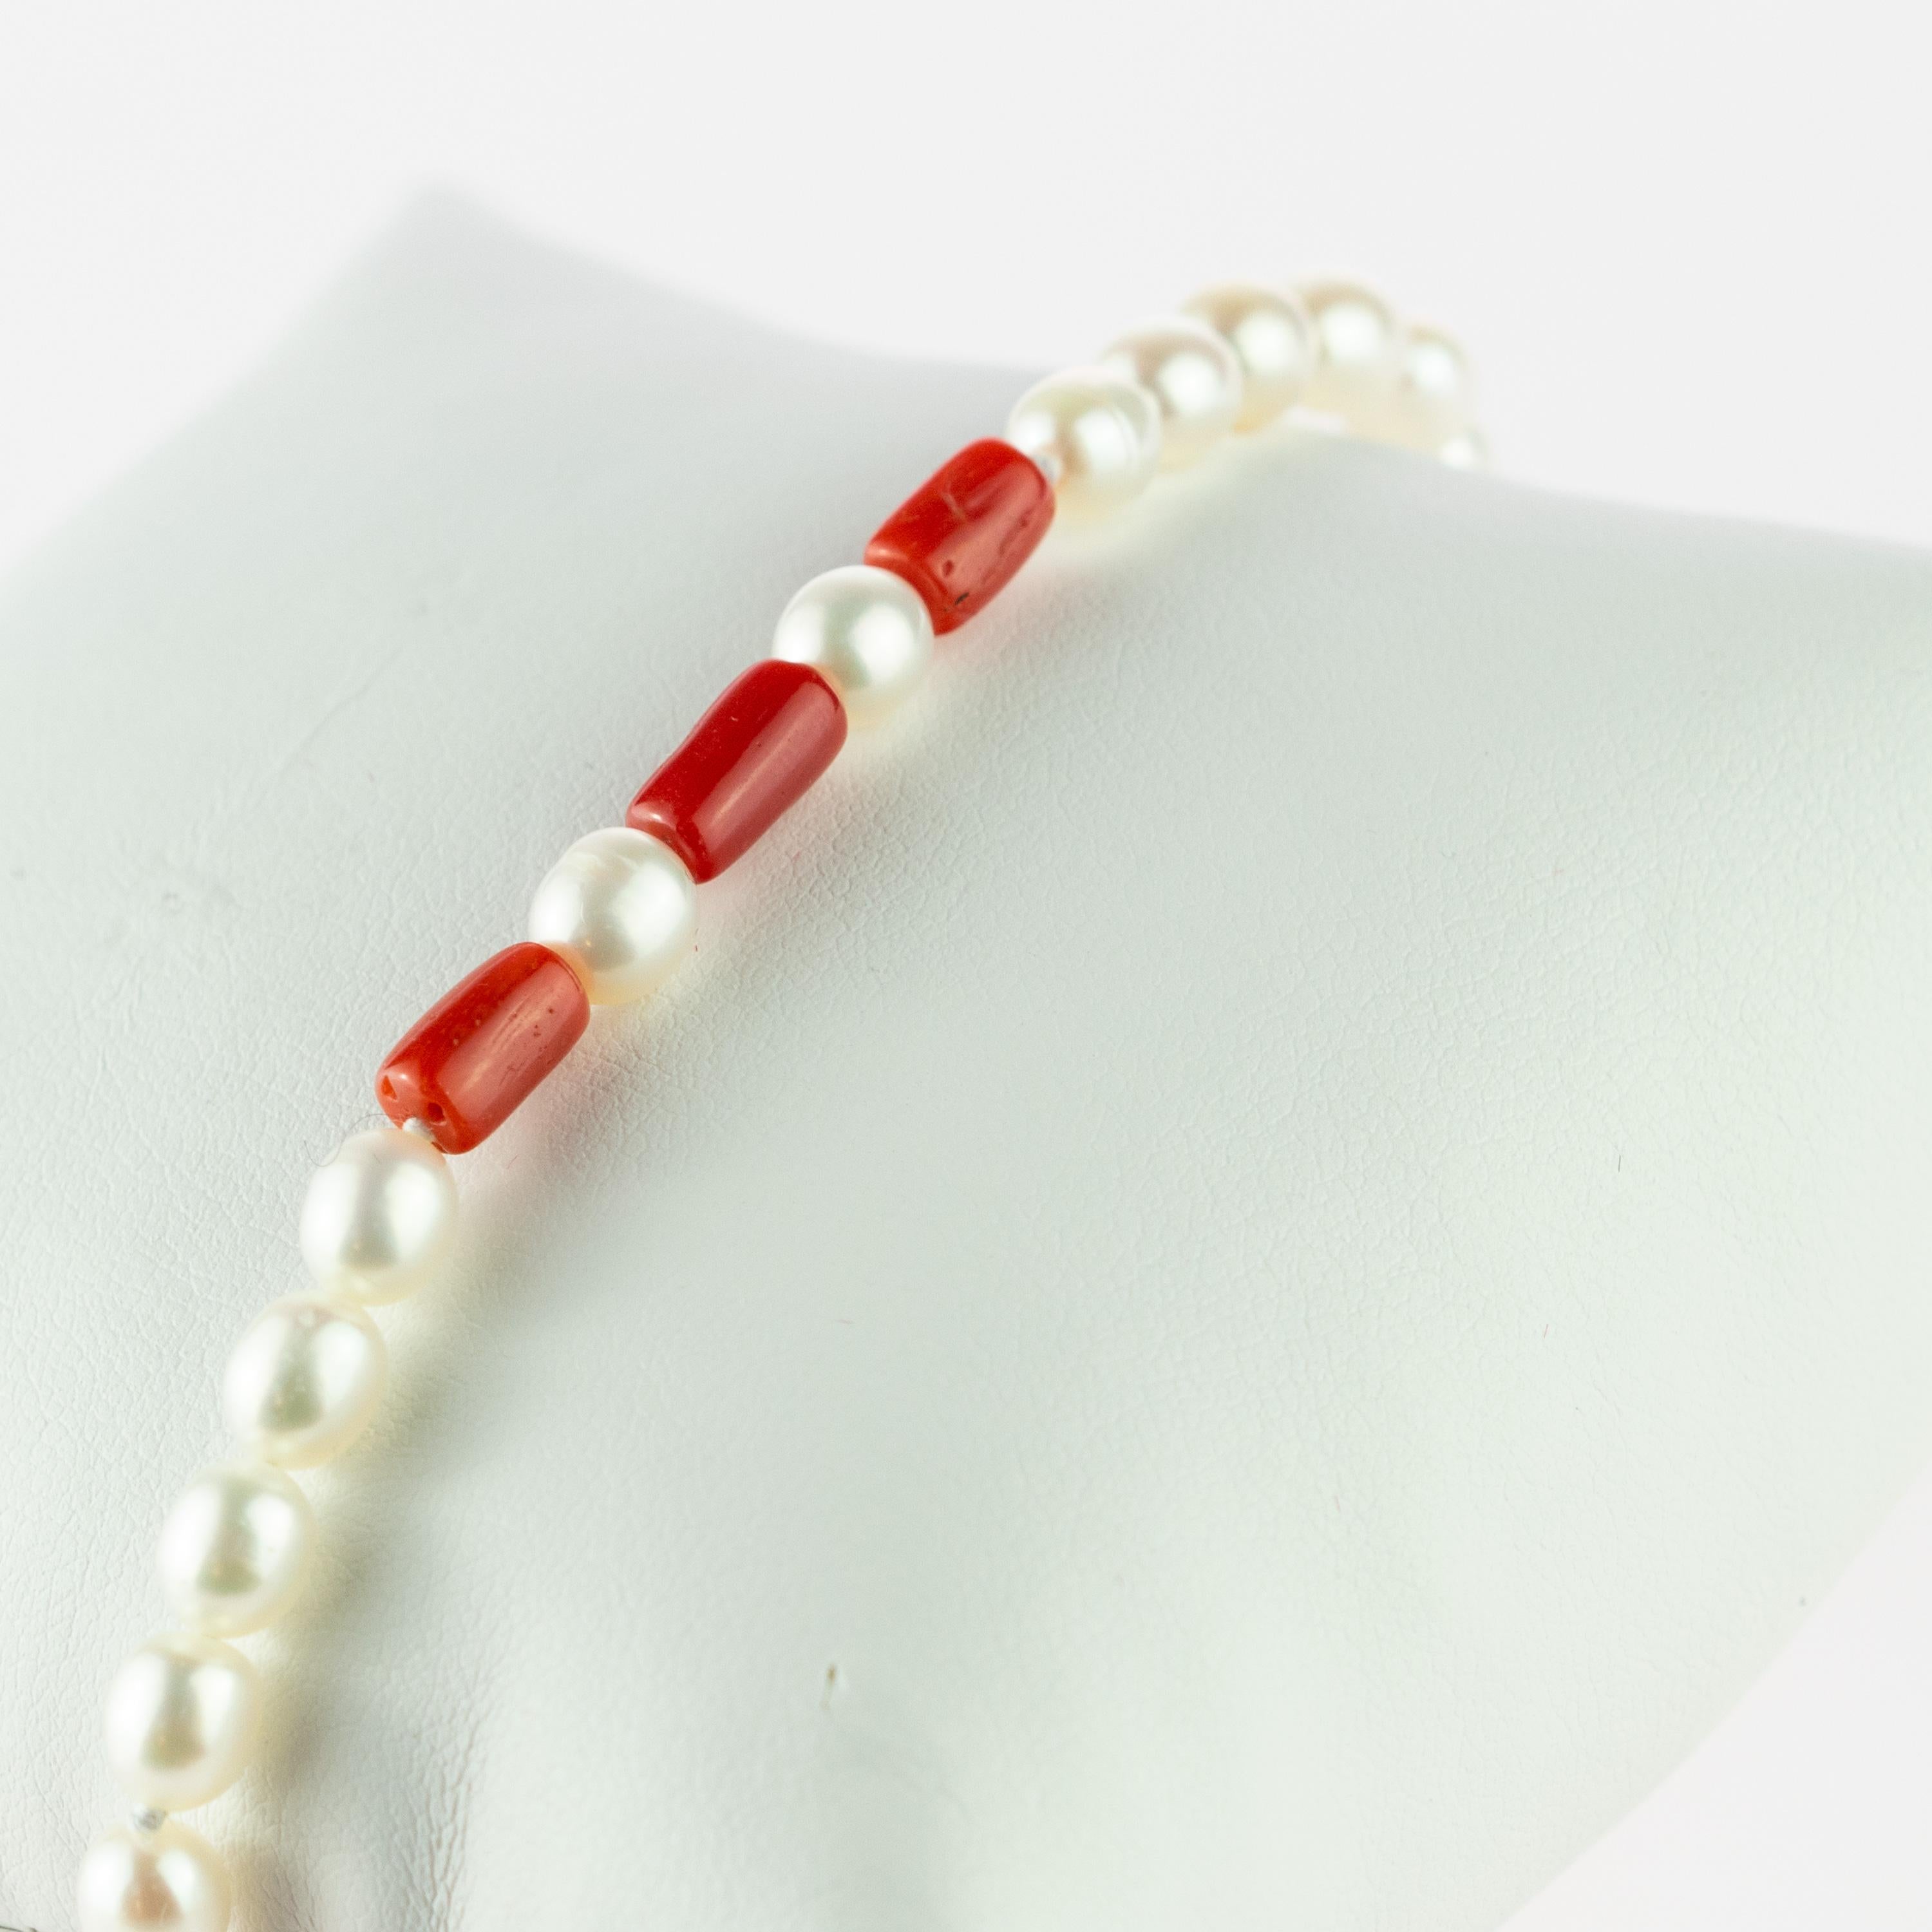 Delight yourself with a luminous handmade jewelry. A coral and freshwater pearls bracelet full of design. A modern and delicate style for a young and fearless woman. Natural precious stones beads with a 18 karat yellow gold closure. The perfect